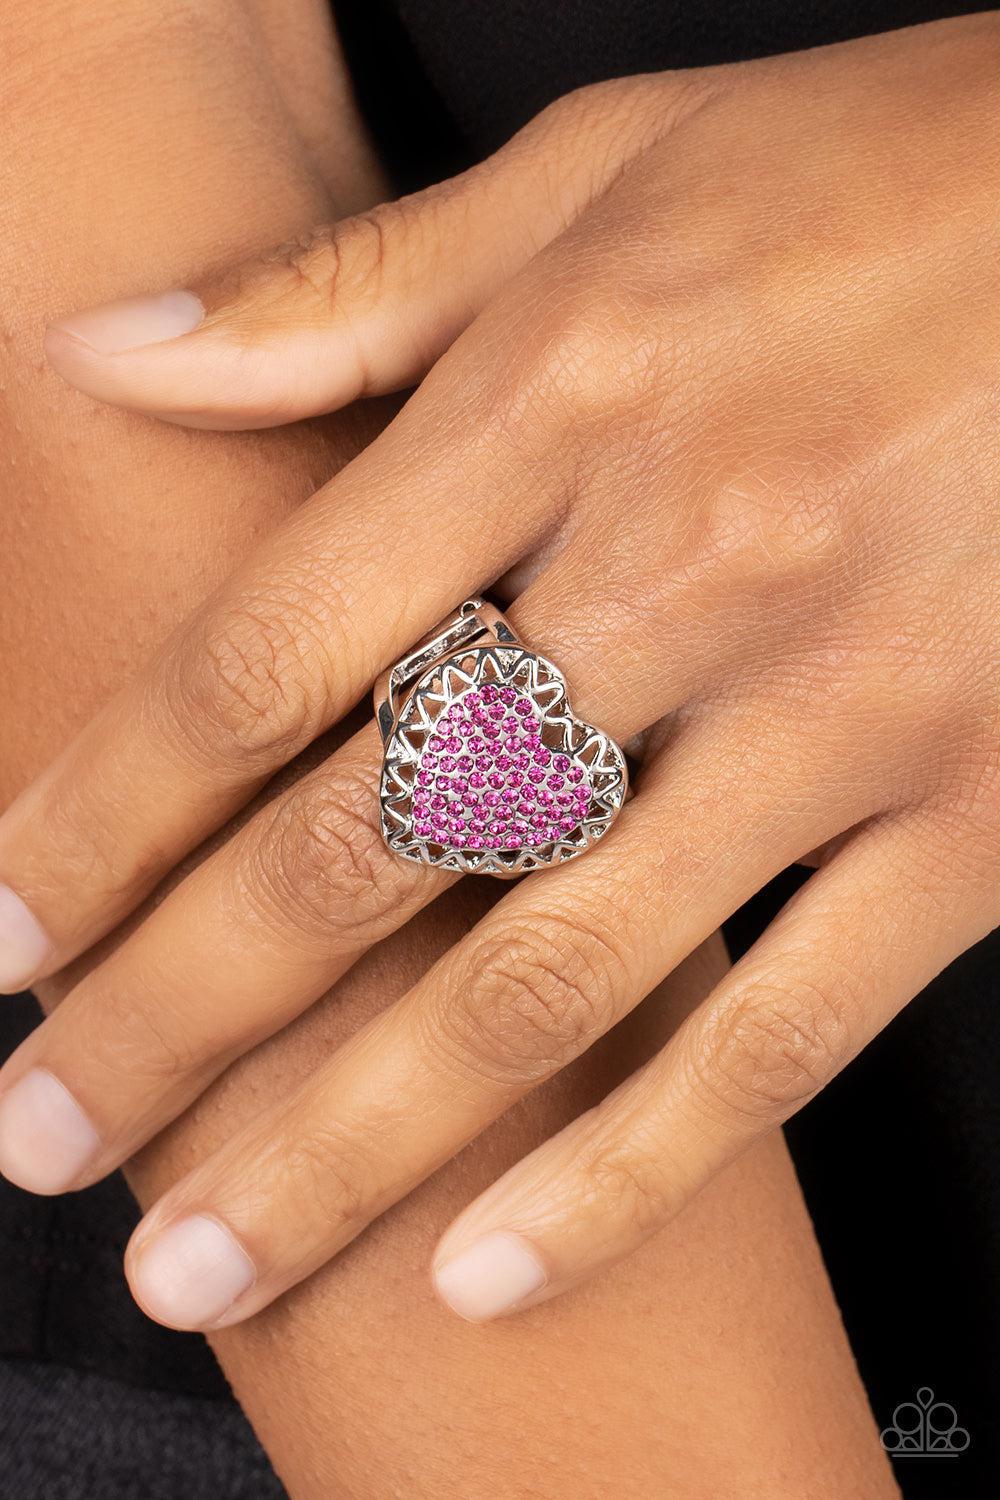 Romantic Escape Pink Rhinestone Heart Ring - Paparazzi Accessories-on model - CarasShop.com - $5 Jewelry by Cara Jewels